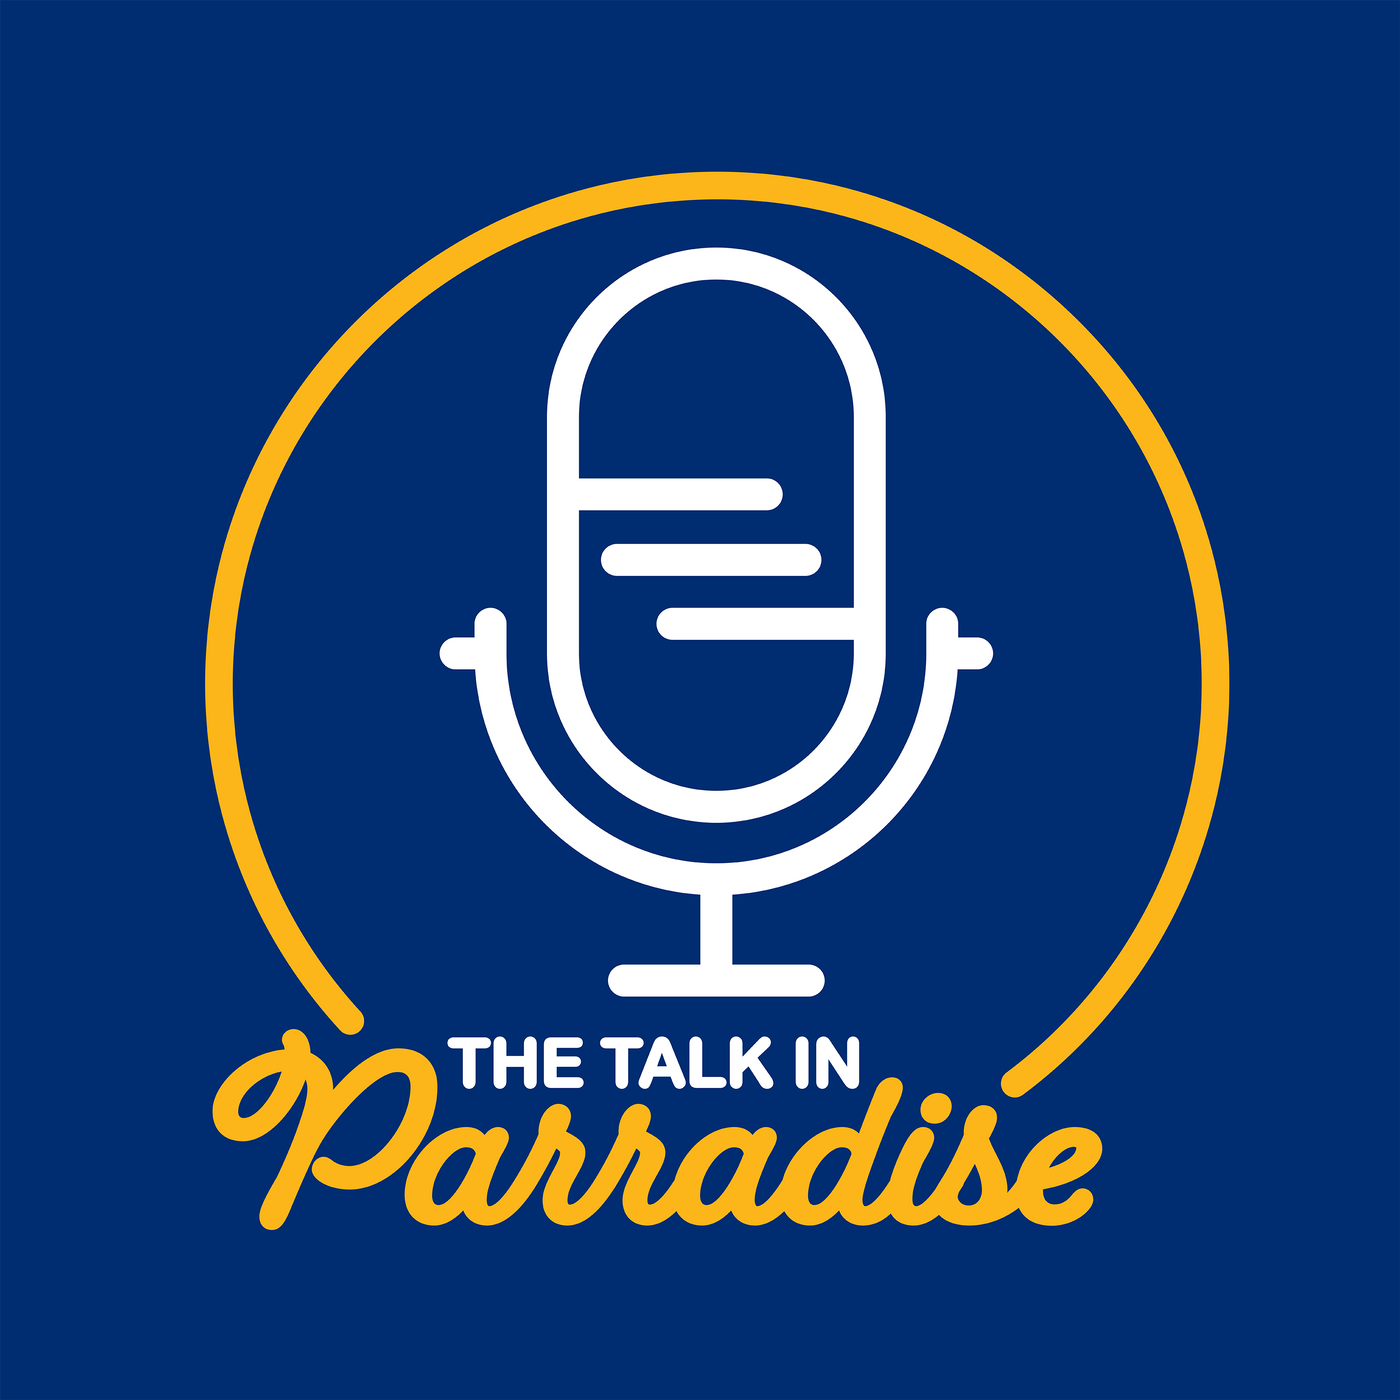 The Talk In Parradise